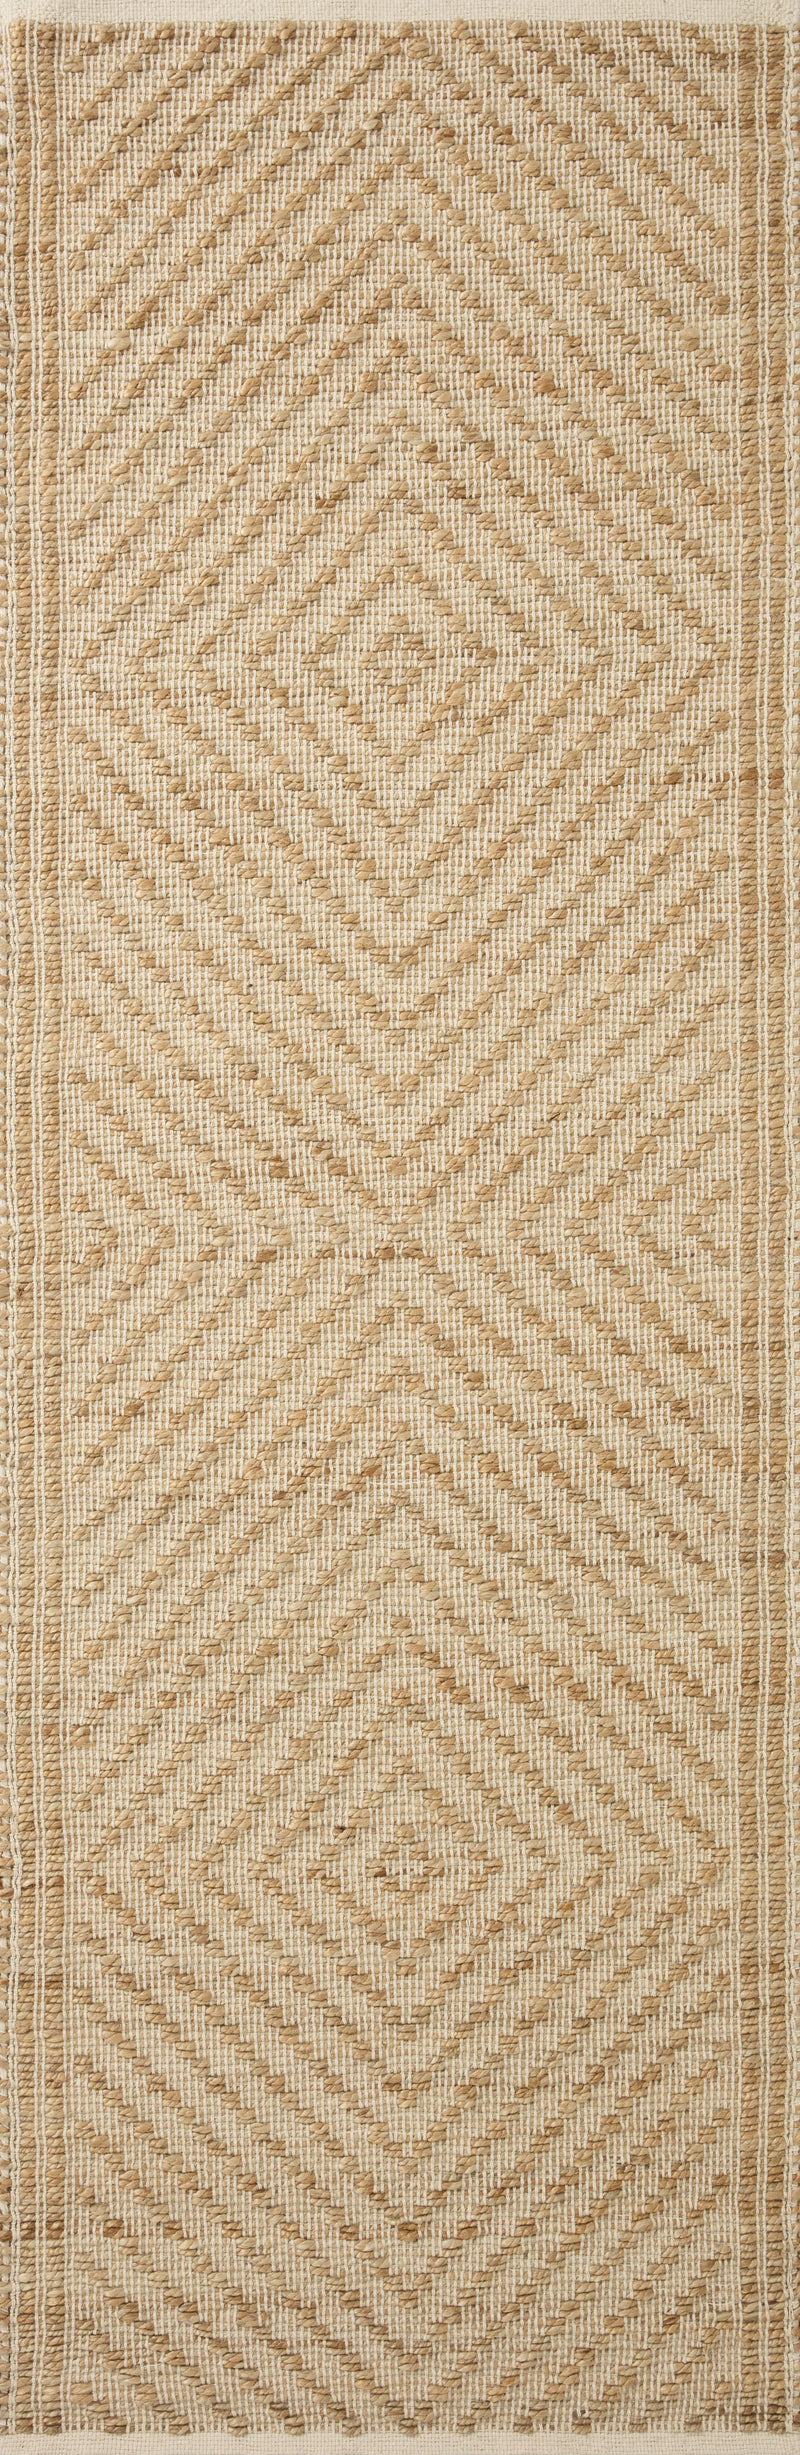 media image for colton hand woven natural ivory rug by angela rose x loloi colocon 04naiv2030 2 285